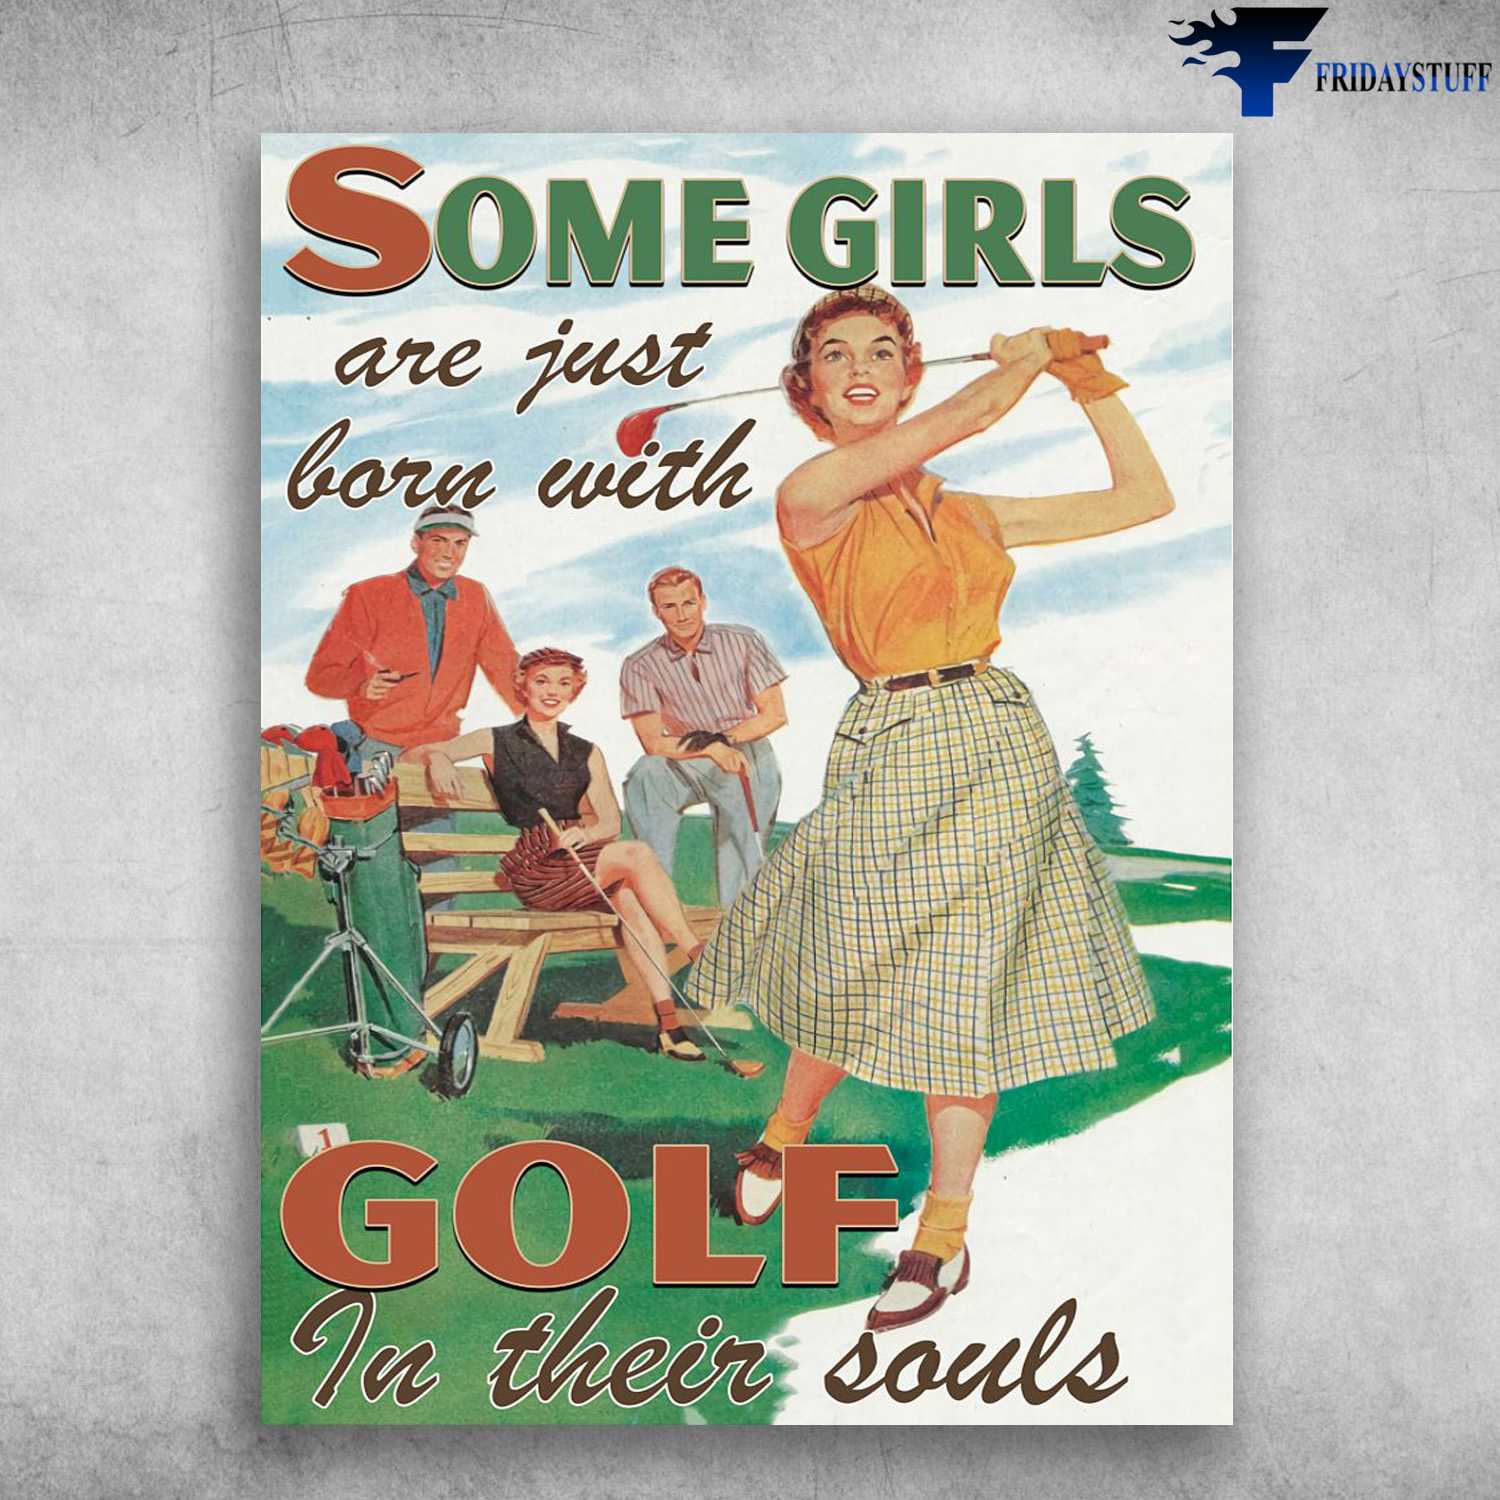 Girl Plays Gold, Gold Lover - Some Girl Are Just Born With, Golf In Their Souls, Golf Poster